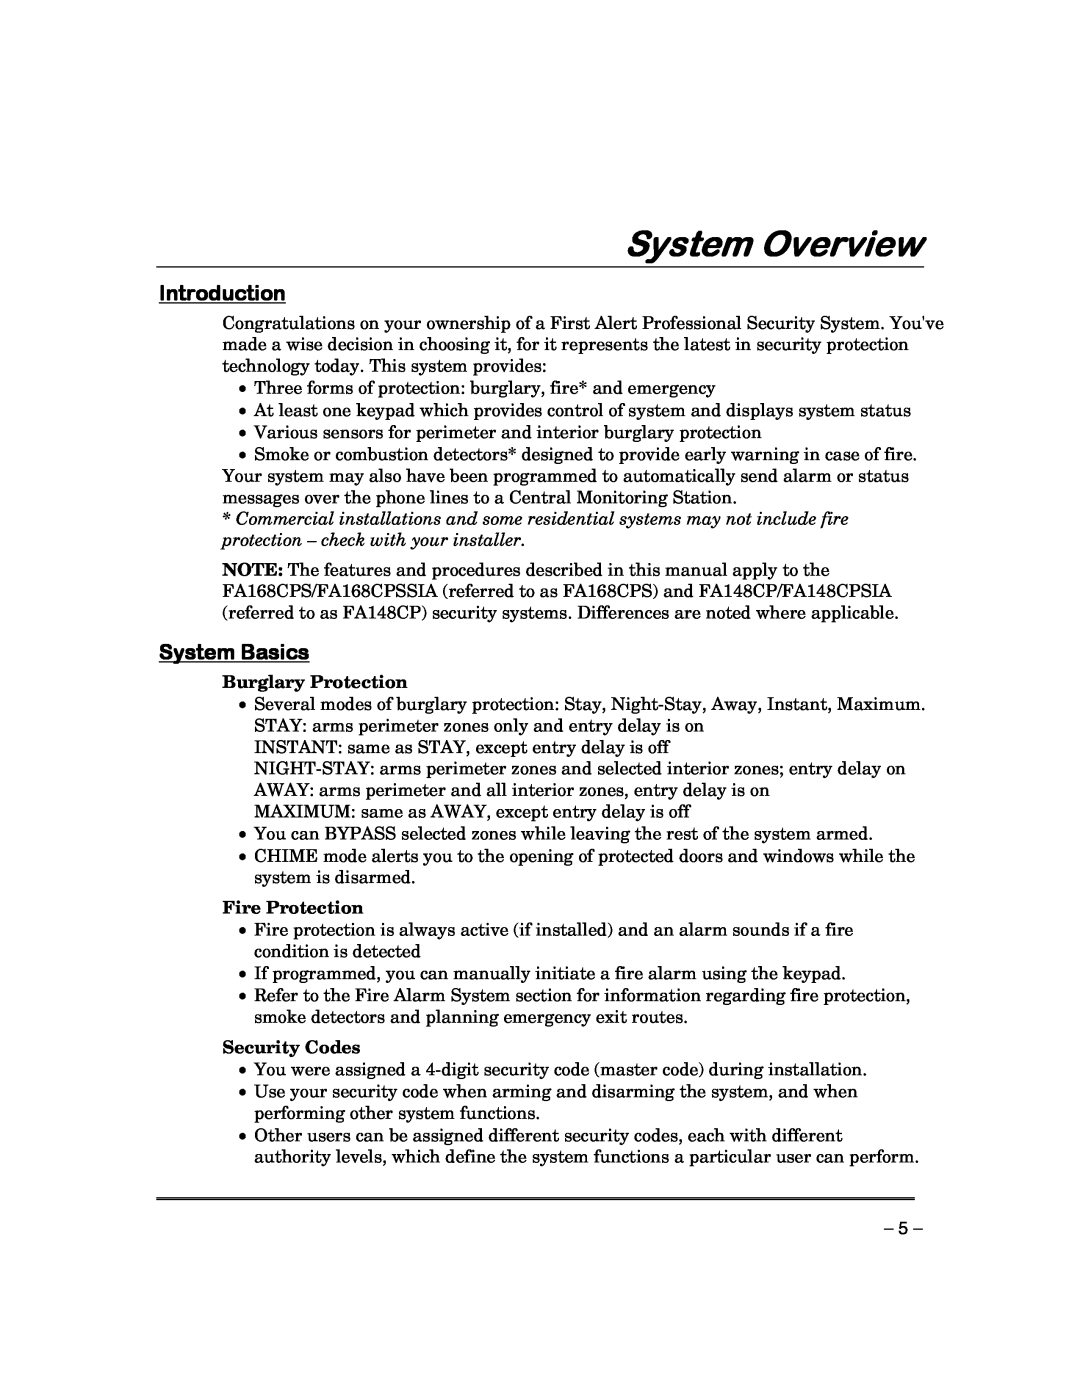 First Alert FA168CPSSIA, FA148CPSIA manual System Overview, Introduction, System Basics 